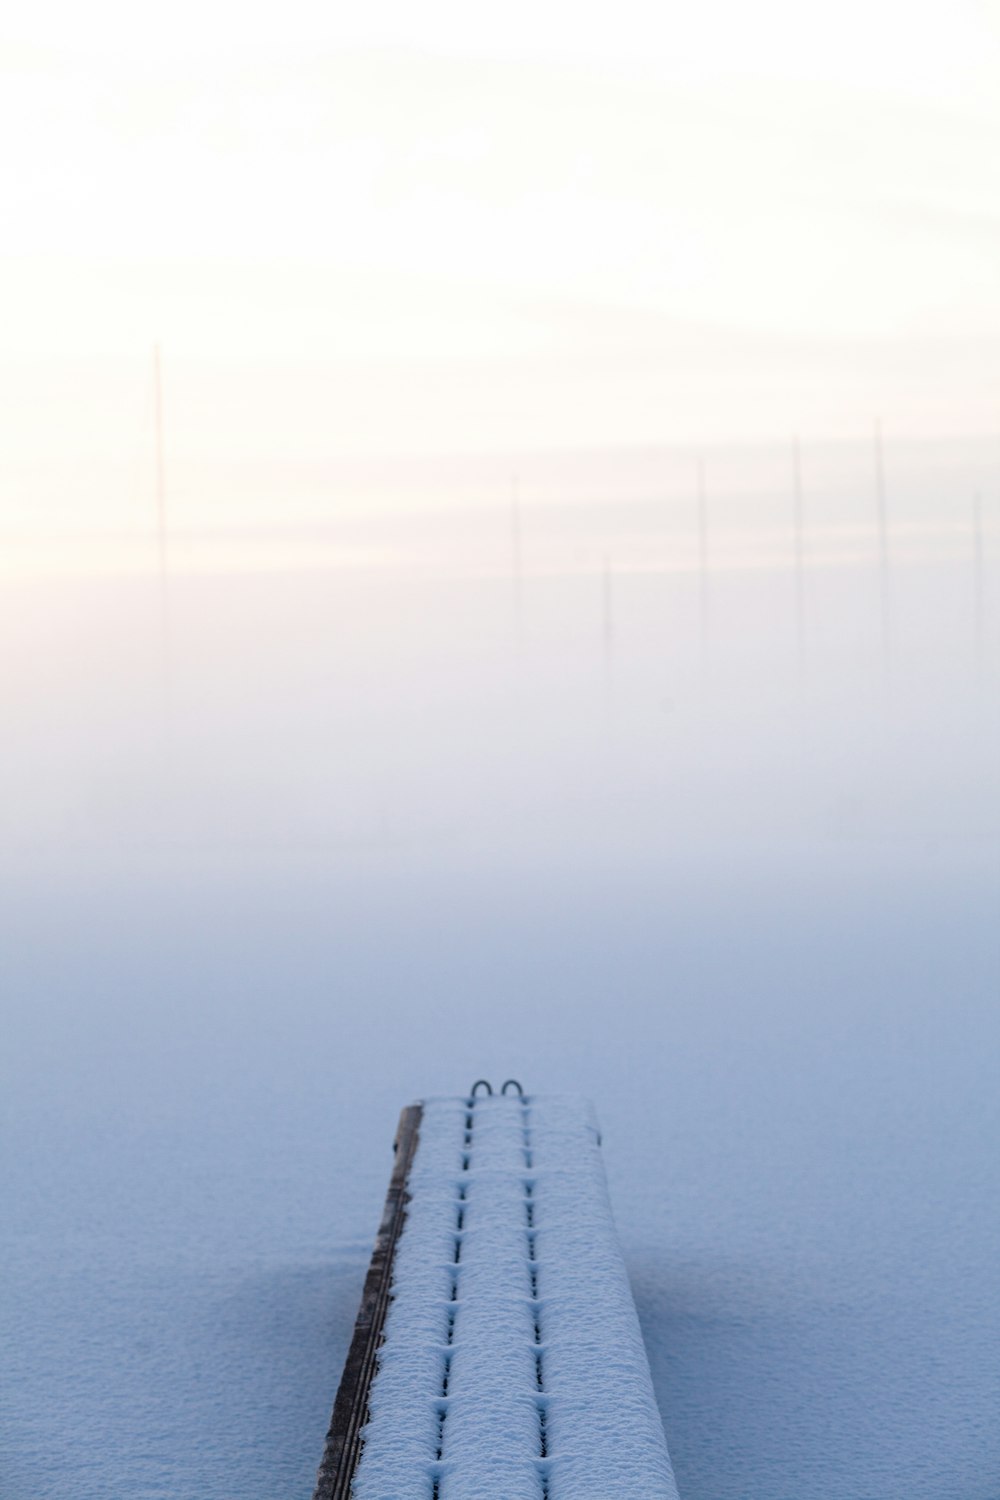 a snow covered bench sitting in the middle of a snow covered field